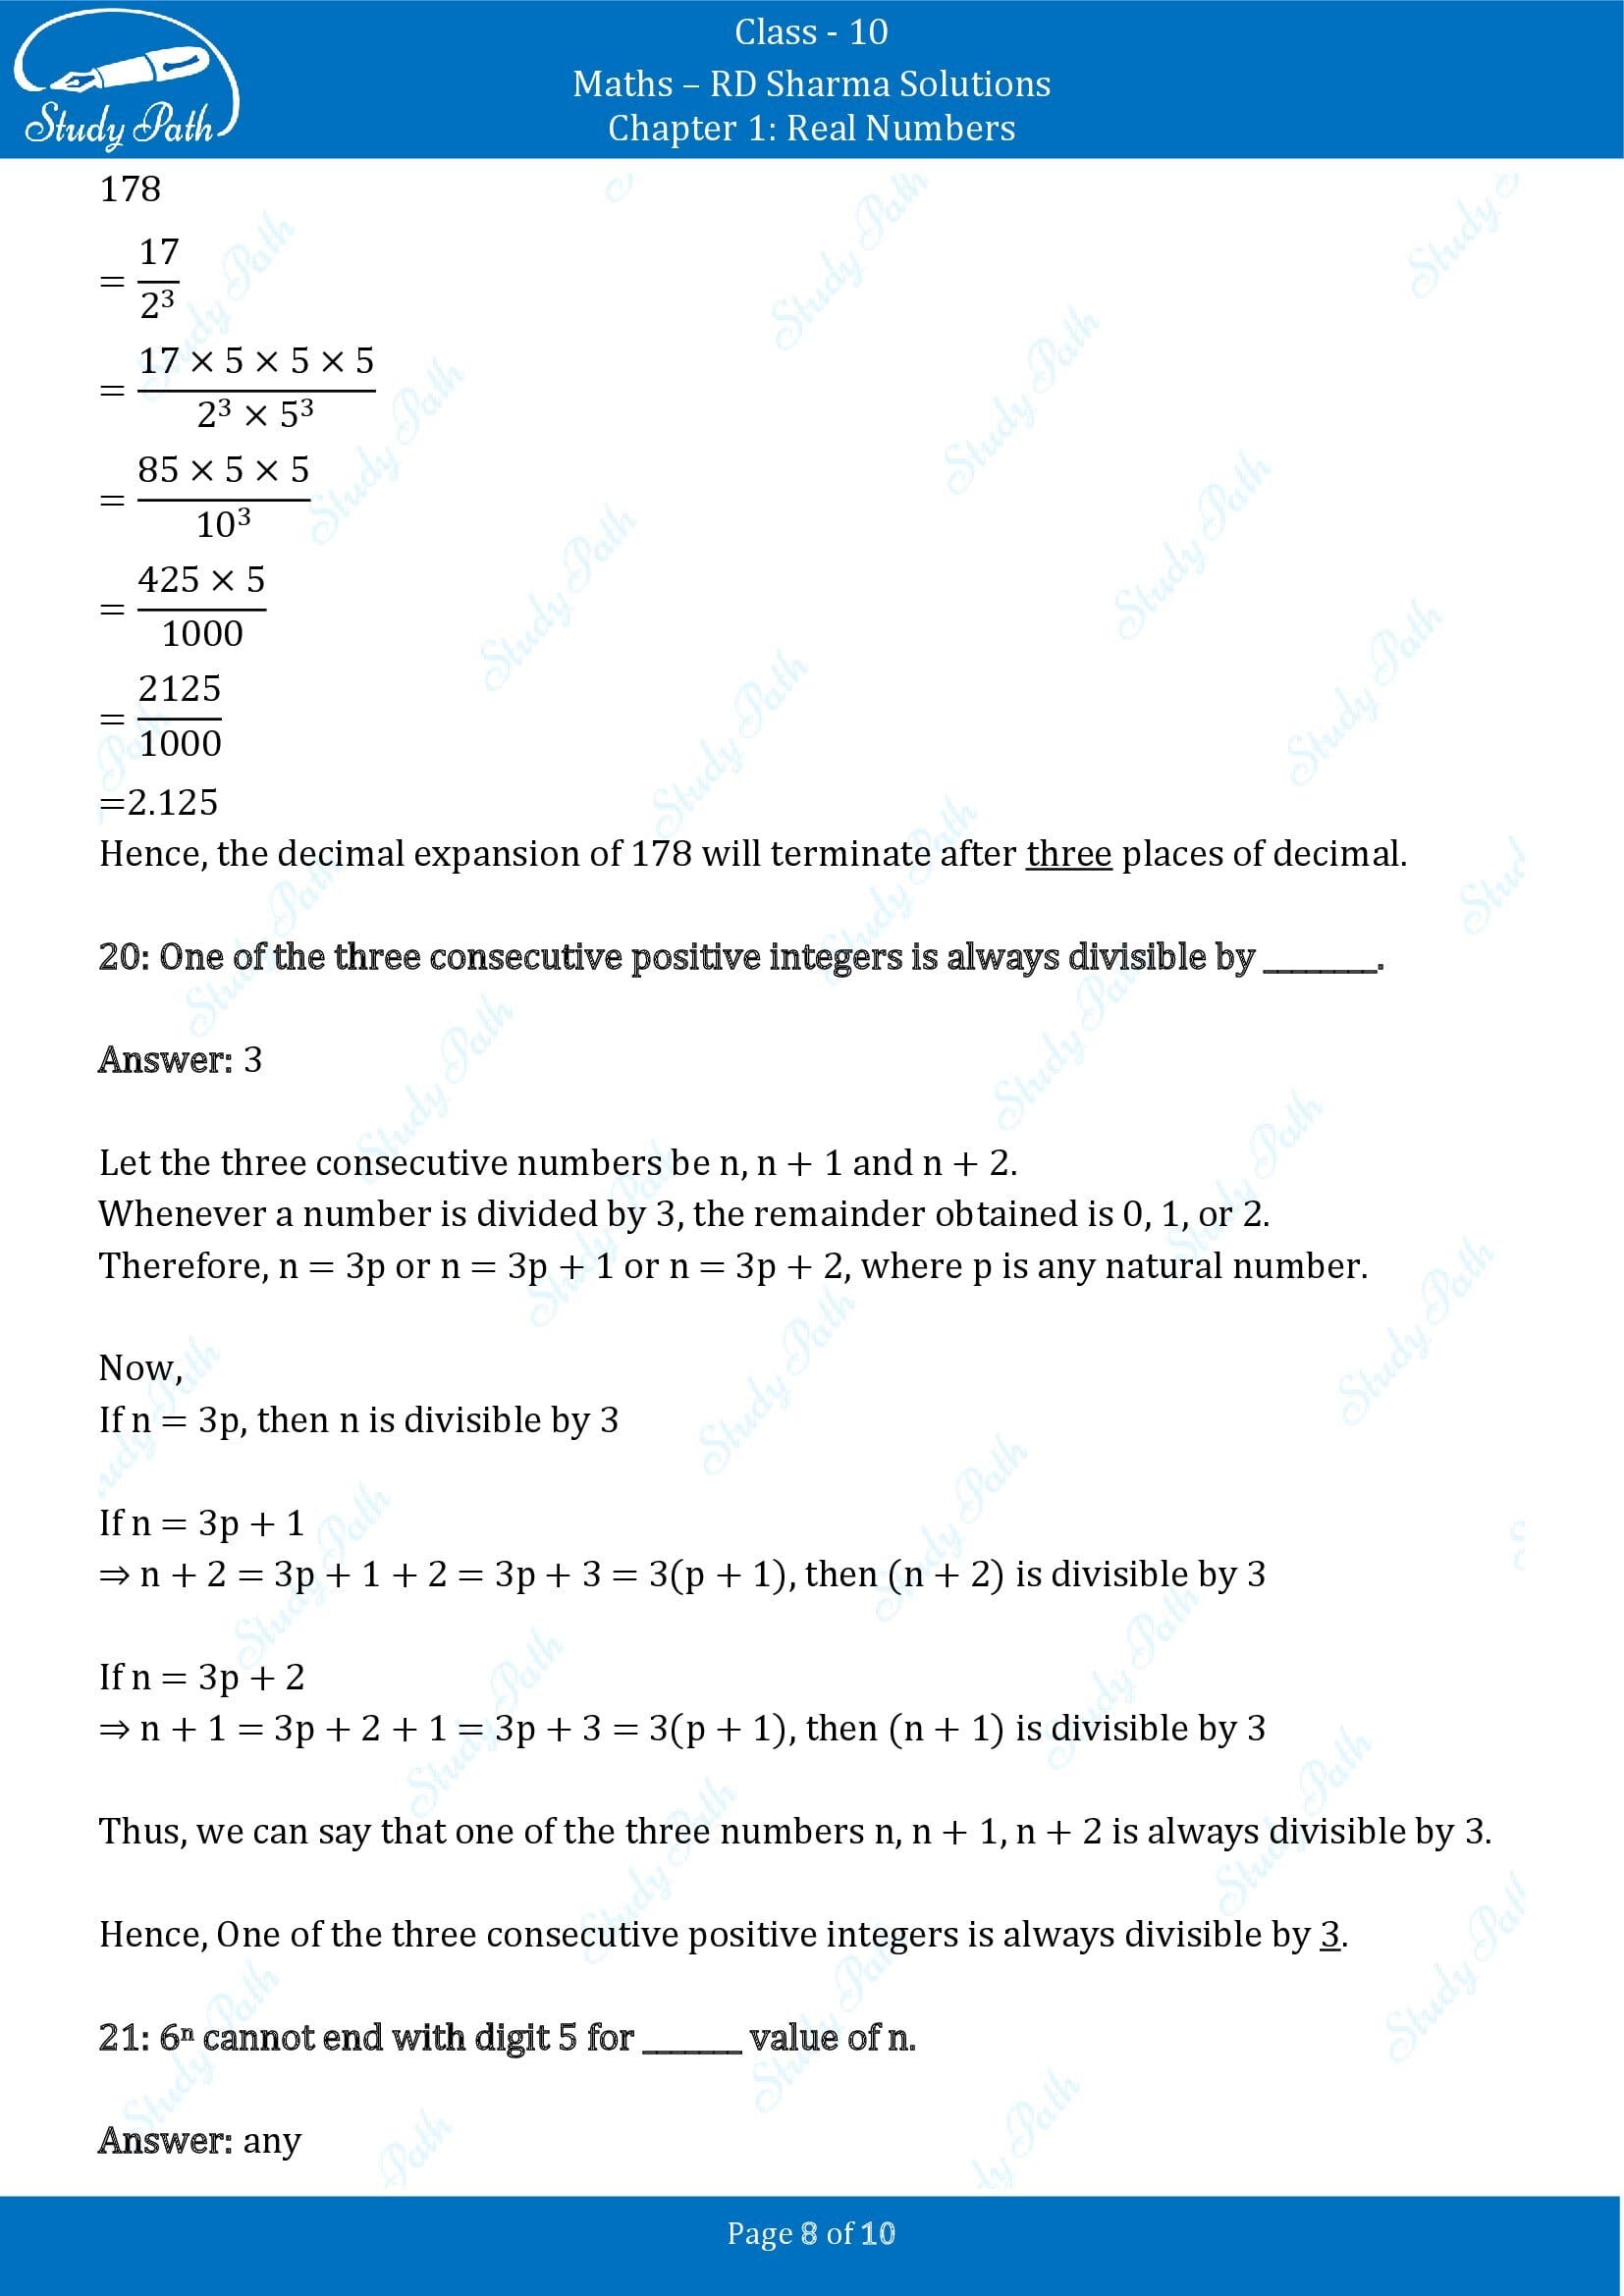 RD Sharma Solutions Class 10 Chapter 1 Real Numbers Fill in the Blank Type Questions FBQs 00008